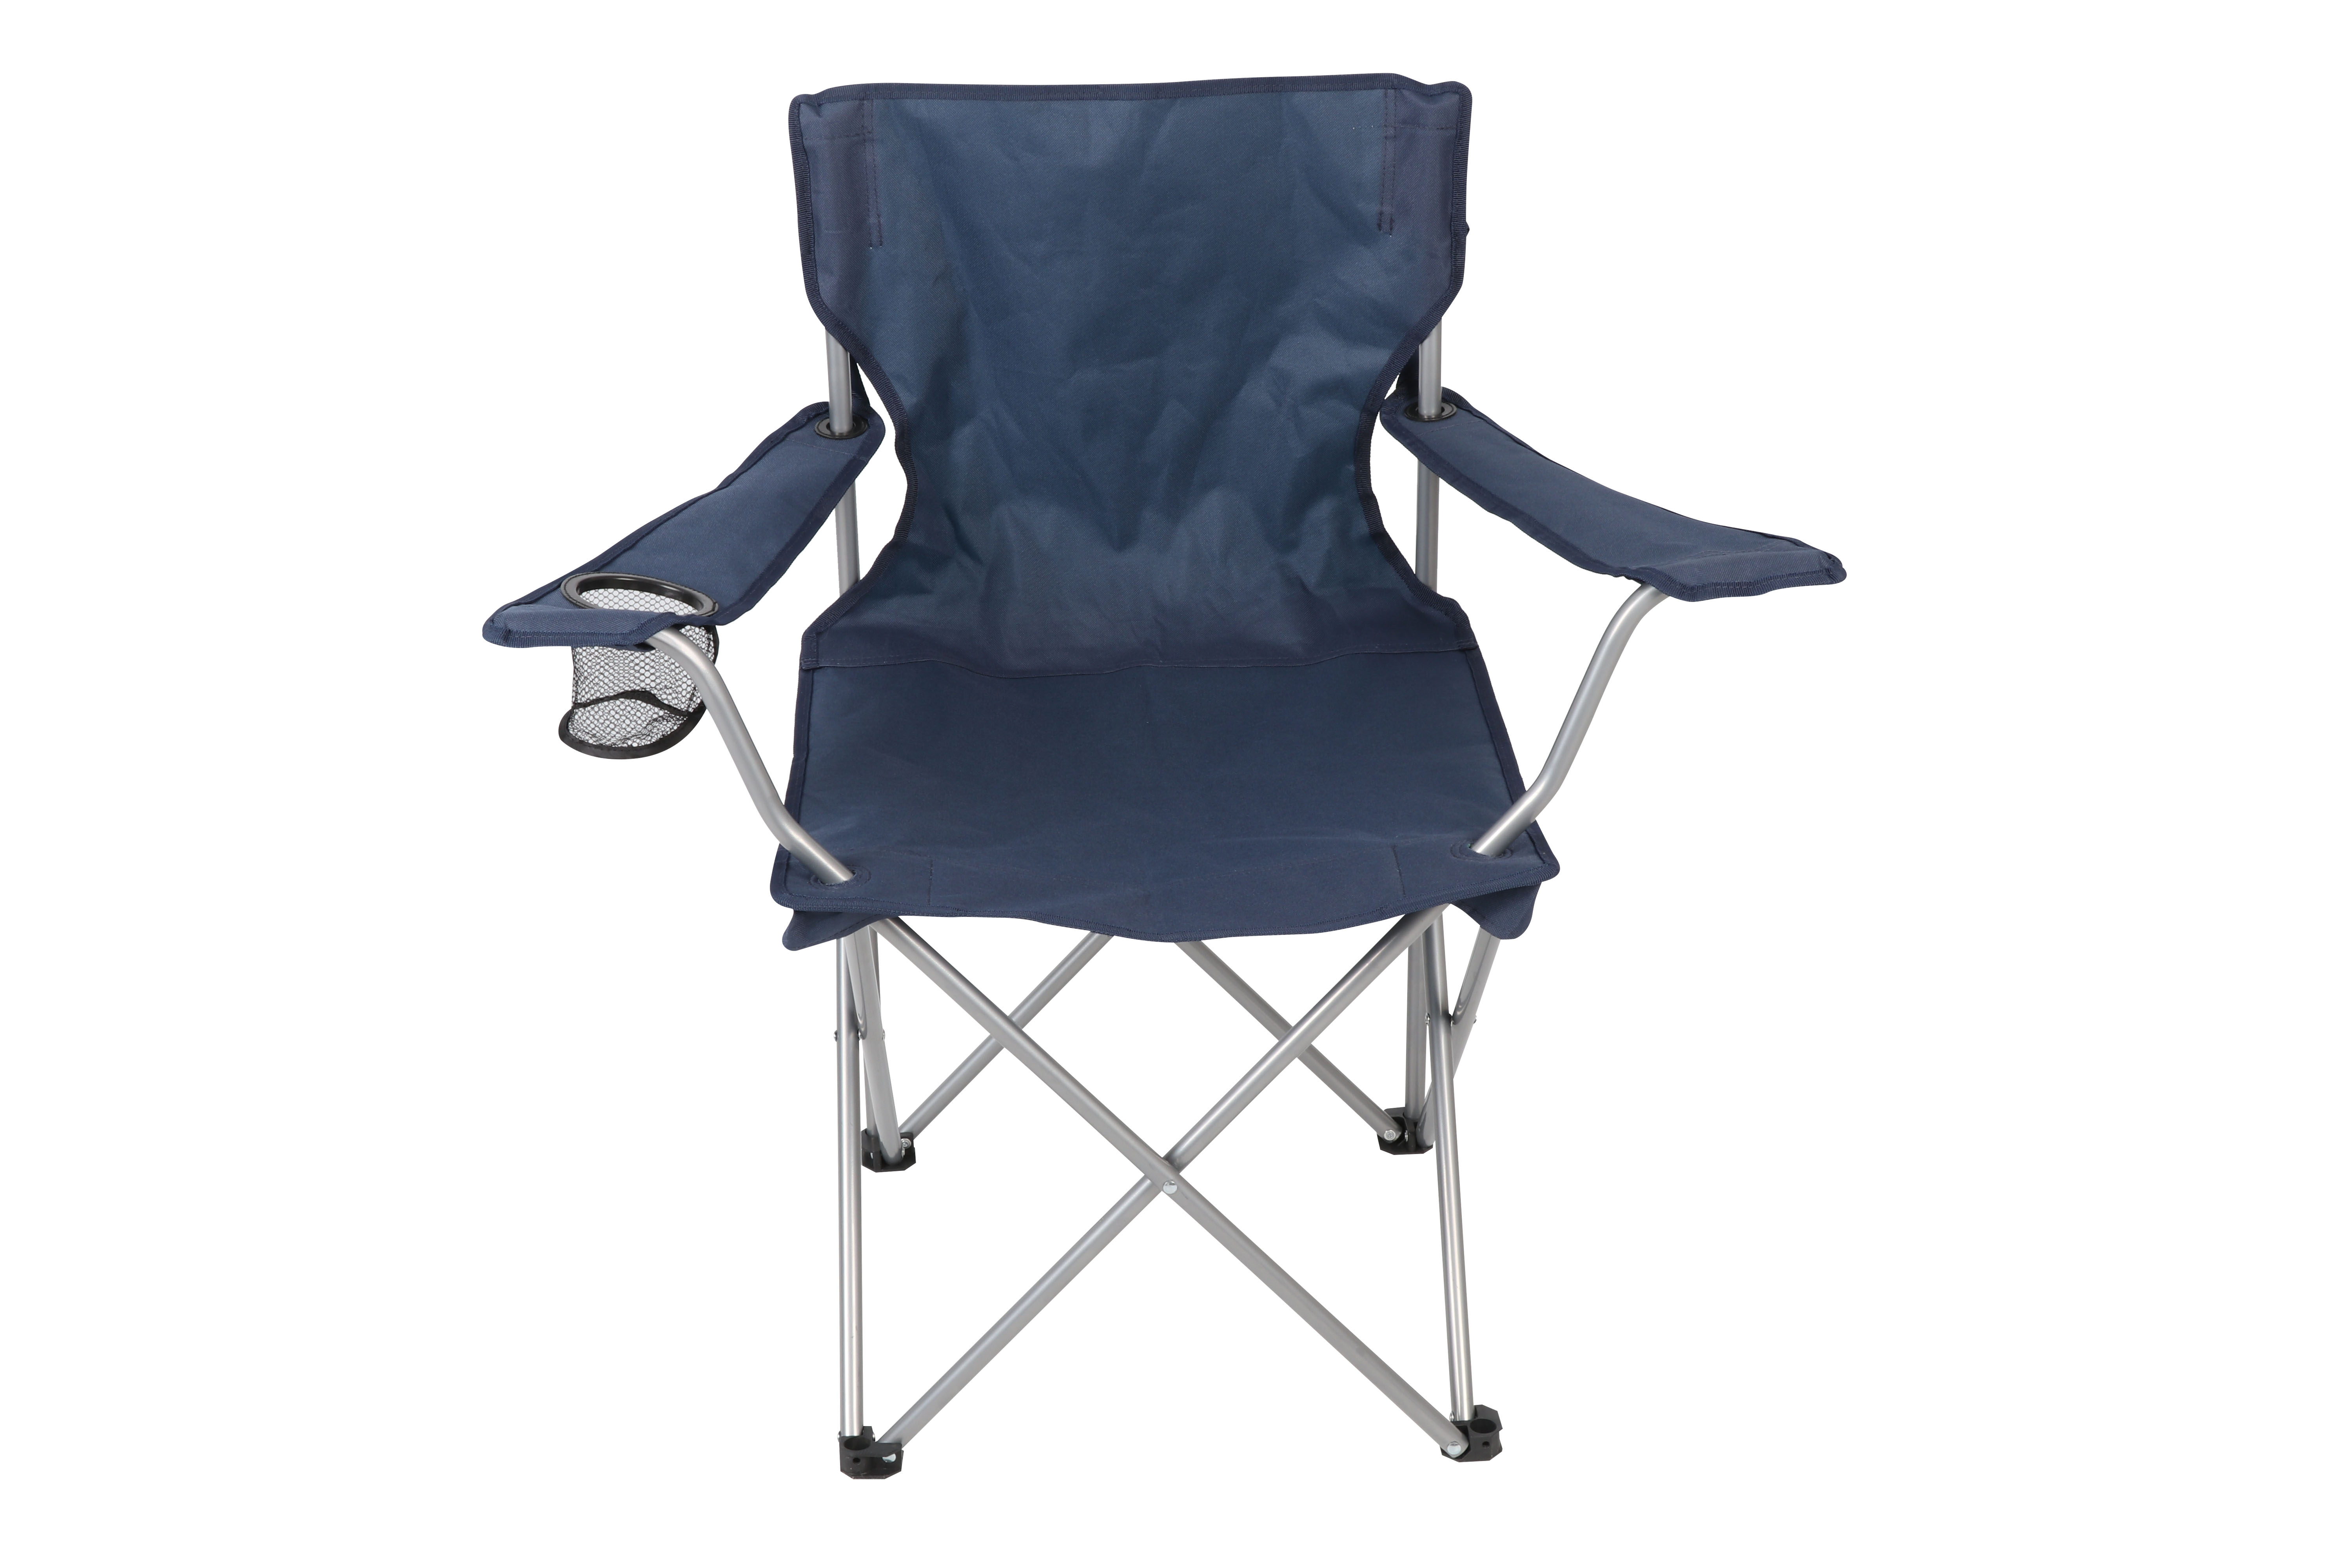 Ozark Trail Camping Chair, Blue, 4 and Half Pounds - image 7 of 13